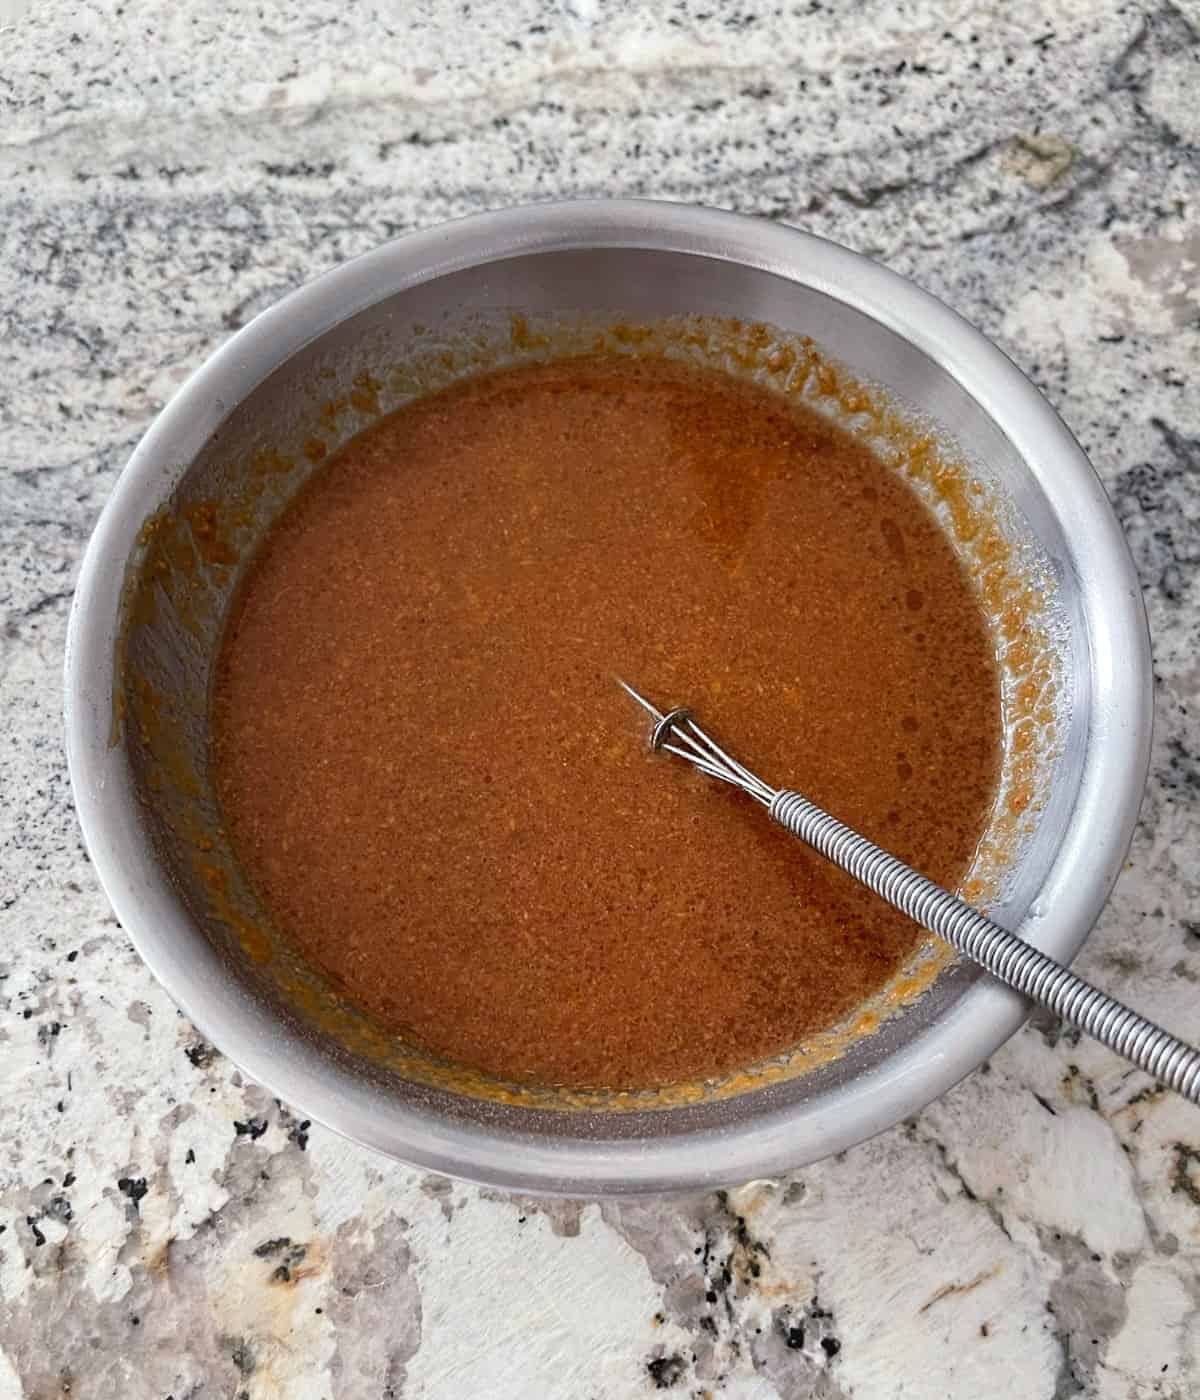 Whisk lime juice, penny sauce, peanut butter, honey, Sriracha, garlic, ginger, and sesame oil in a small bowl.